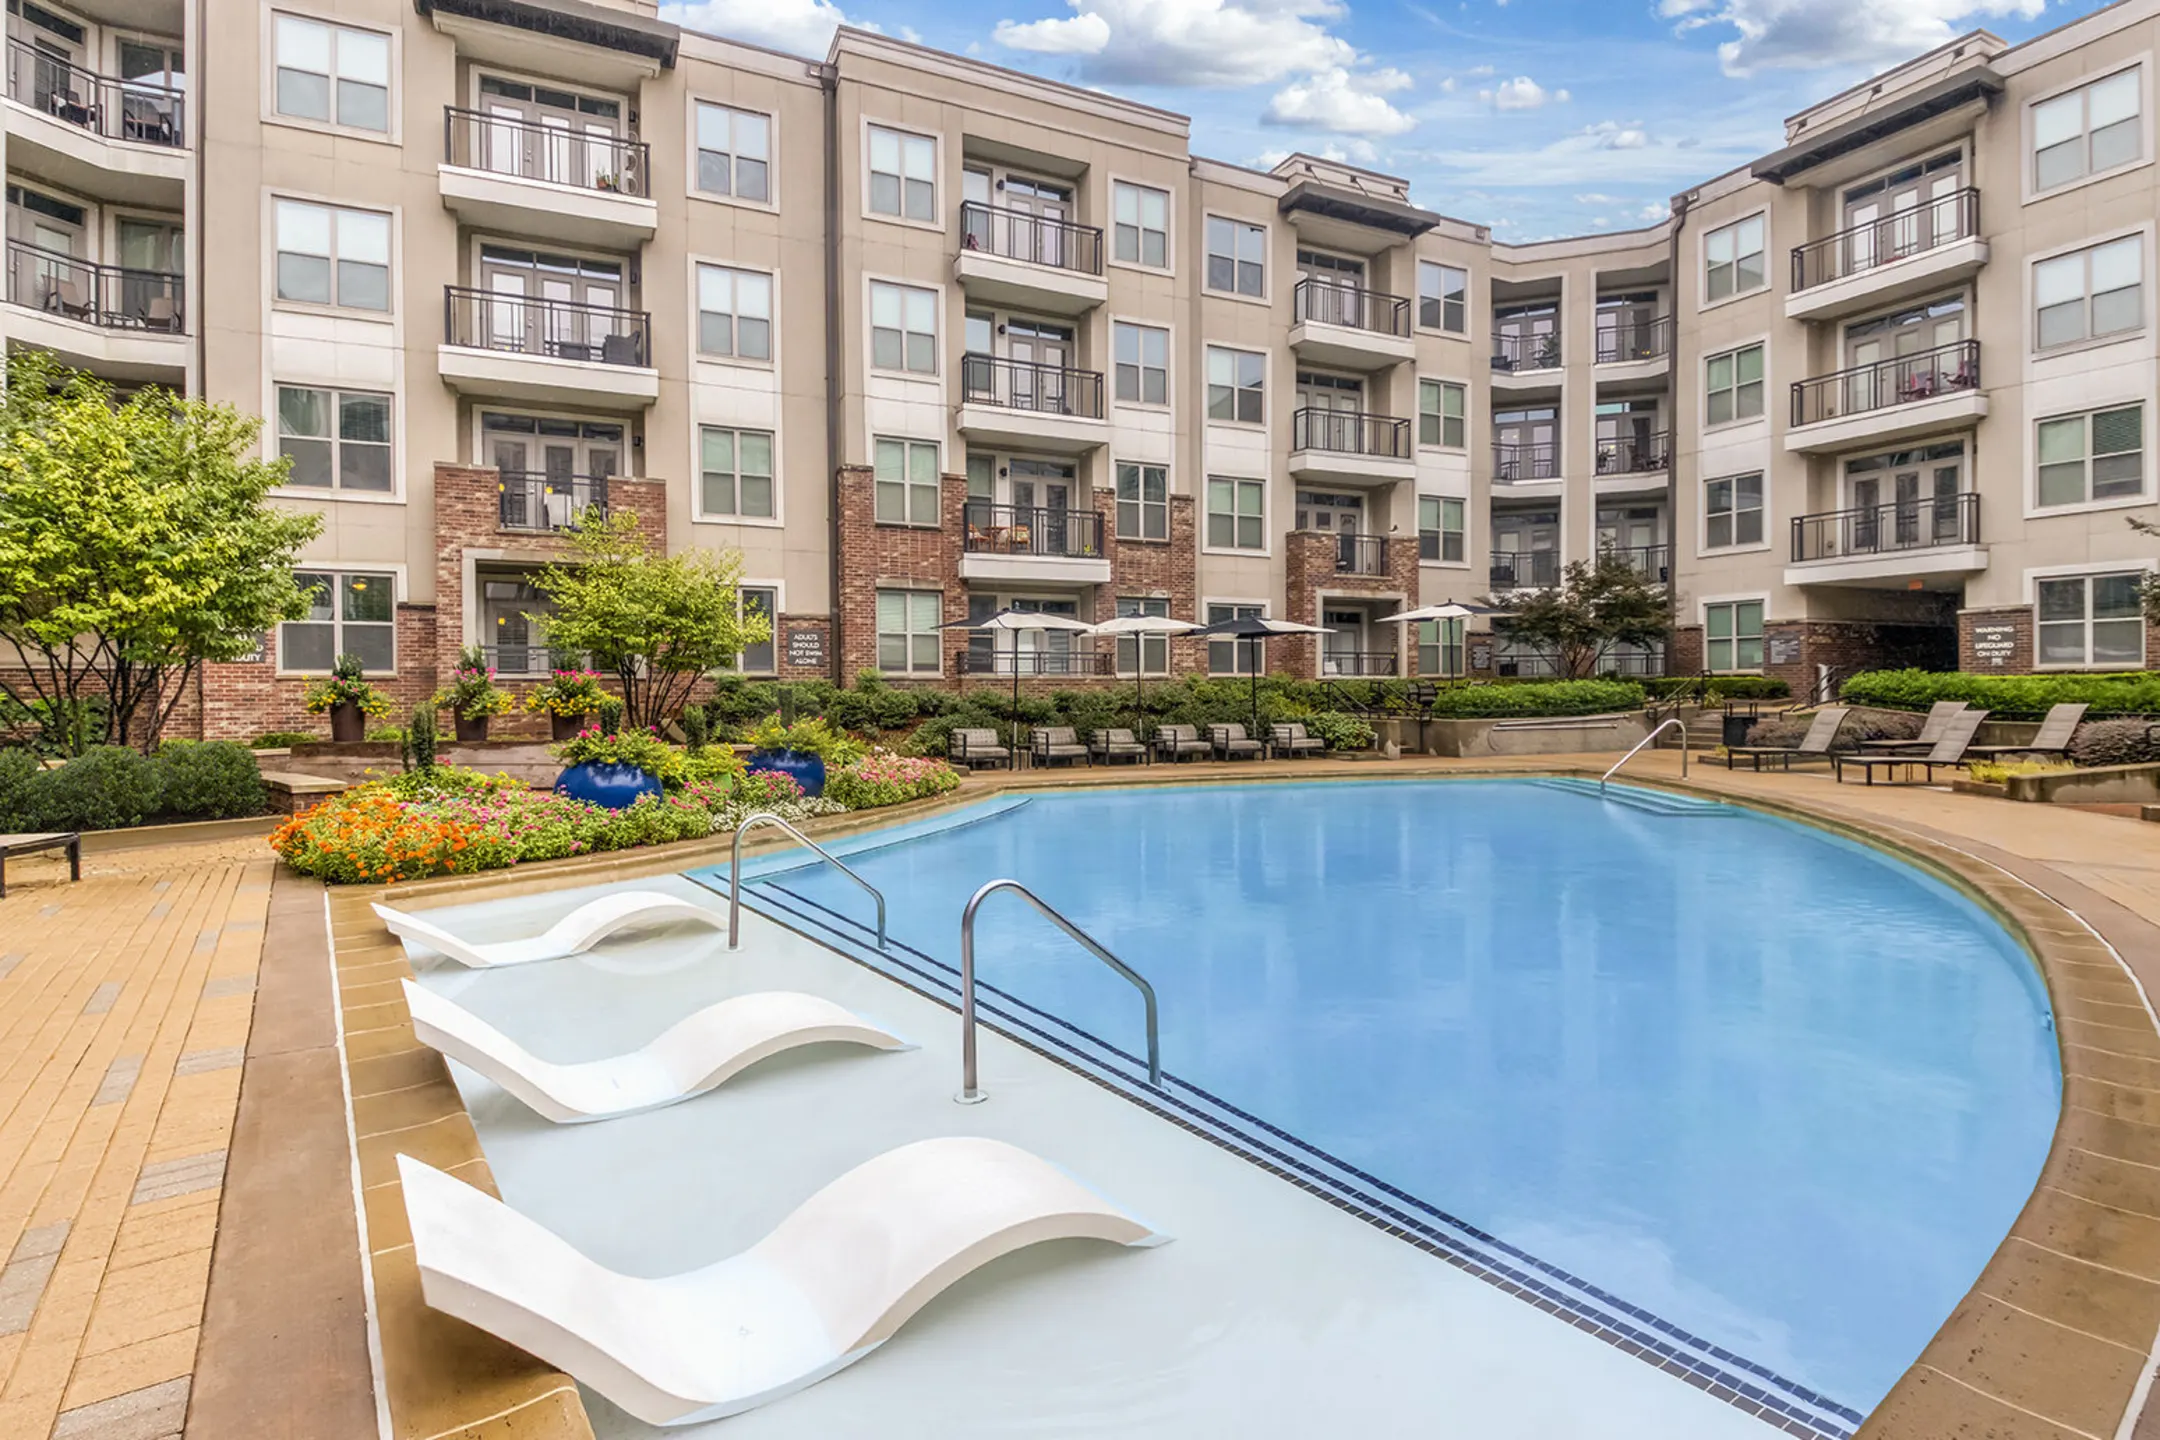 Pool - Camden Southline Apartments - Charlotte, NC